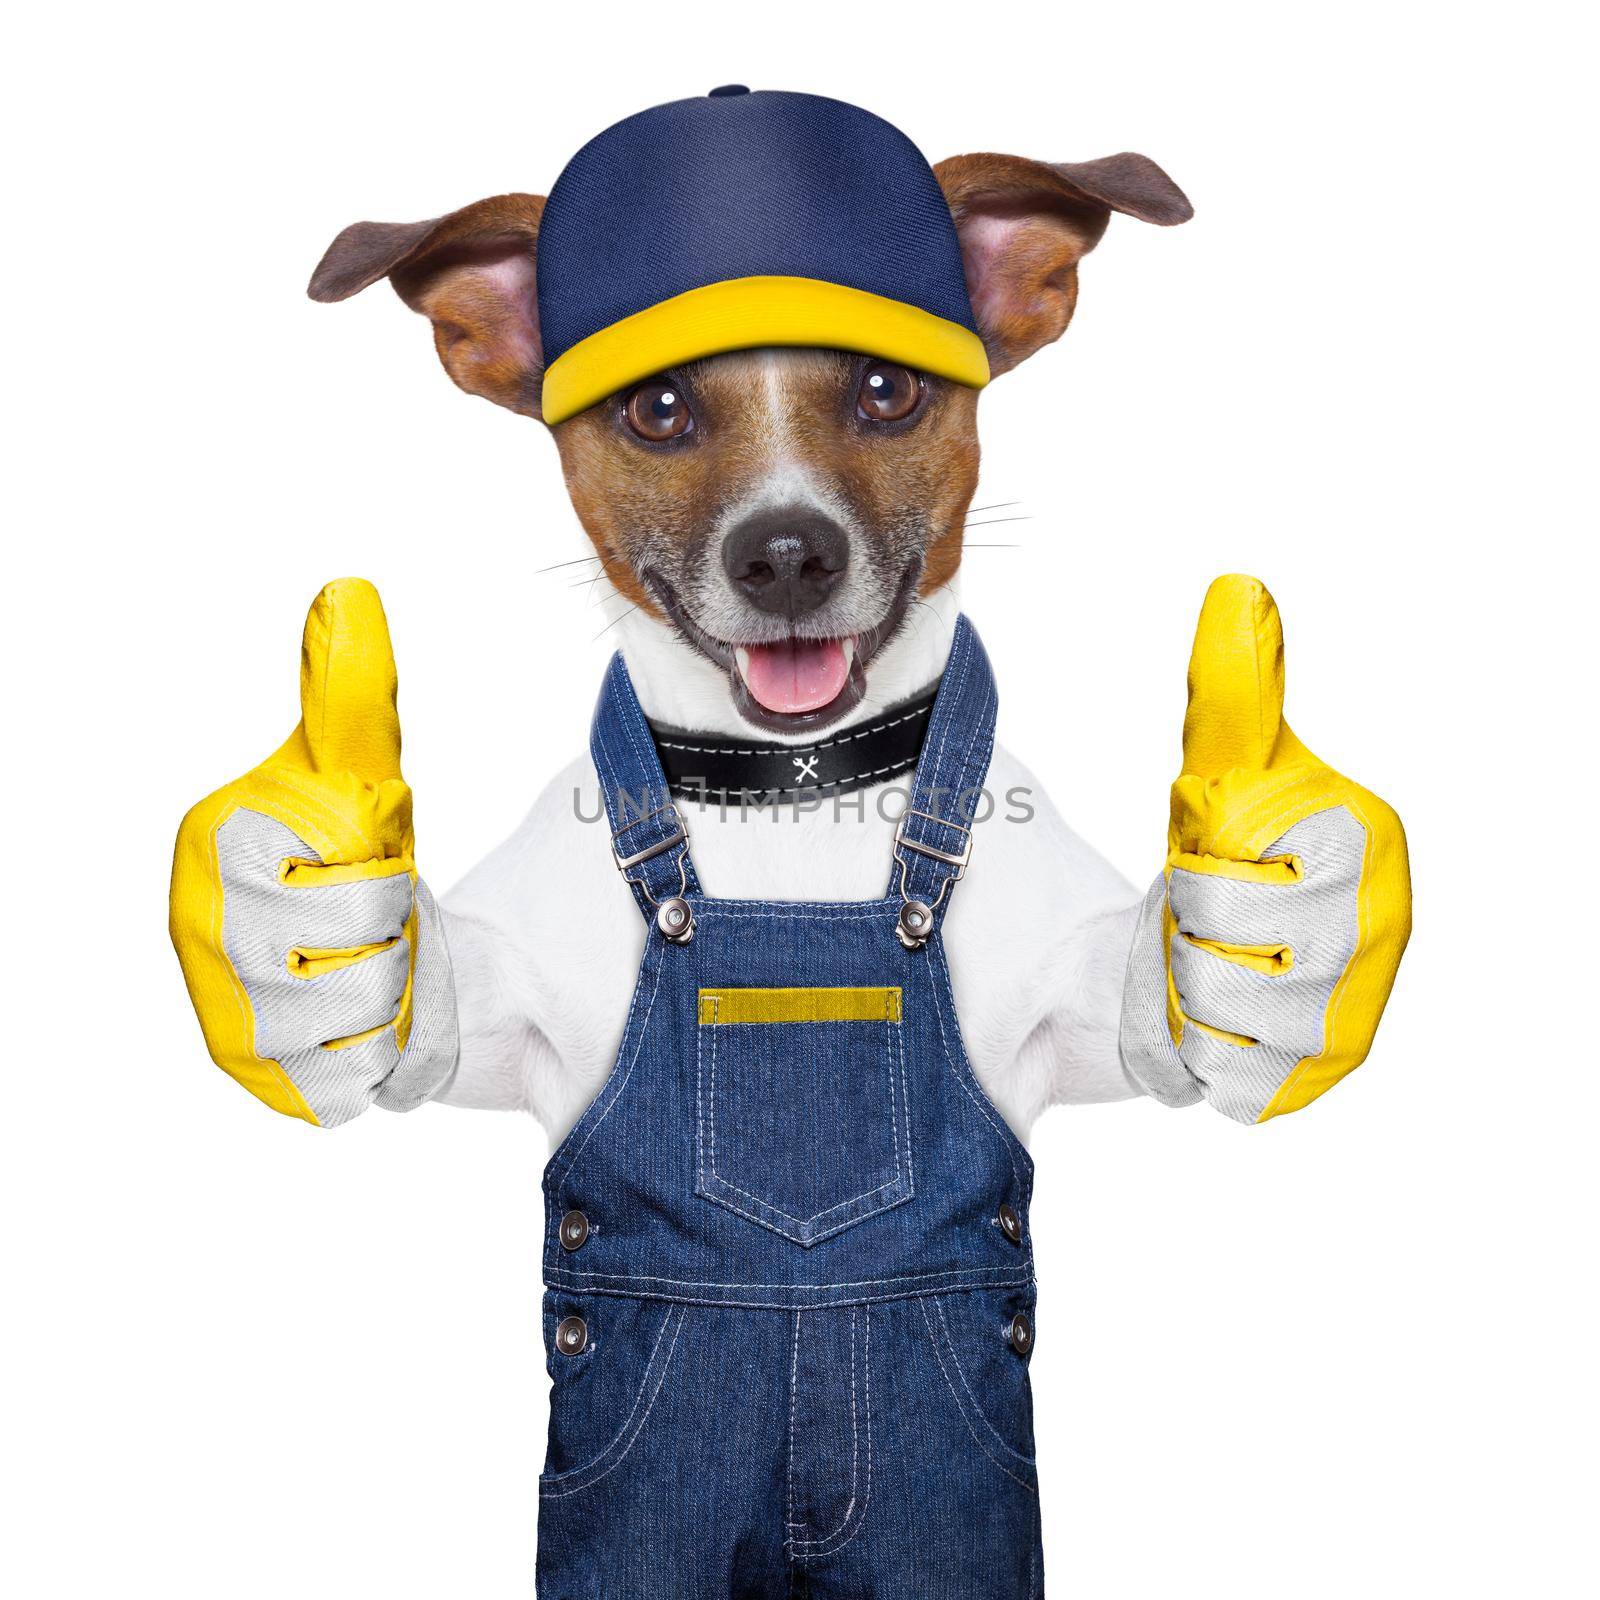 craftsman dog with two thumbs , happy to help